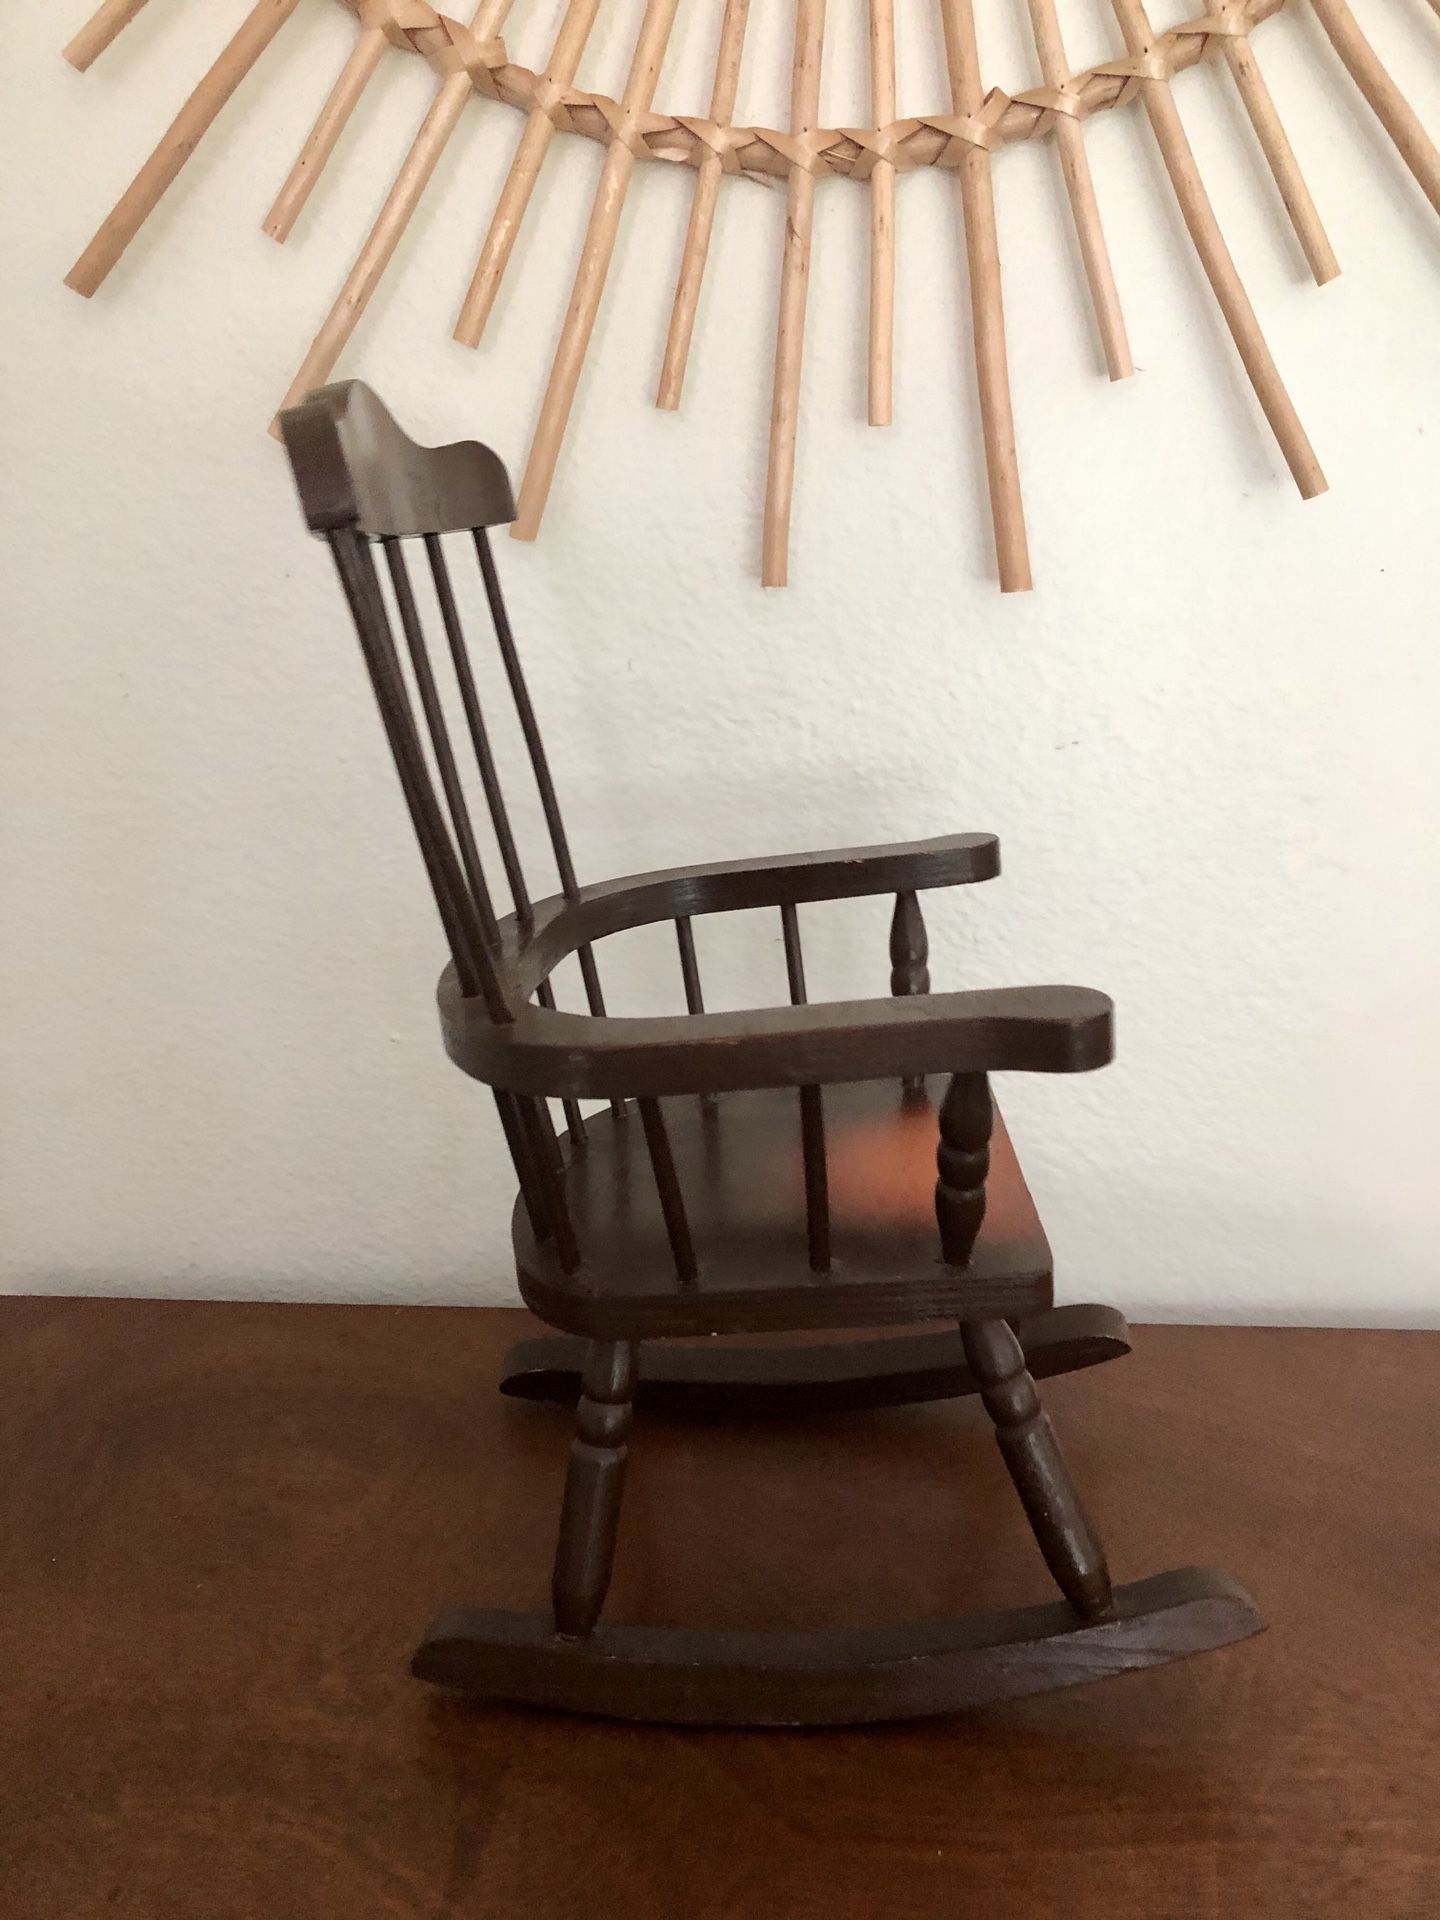 Adorable vintage miniature rocking chair plant stand